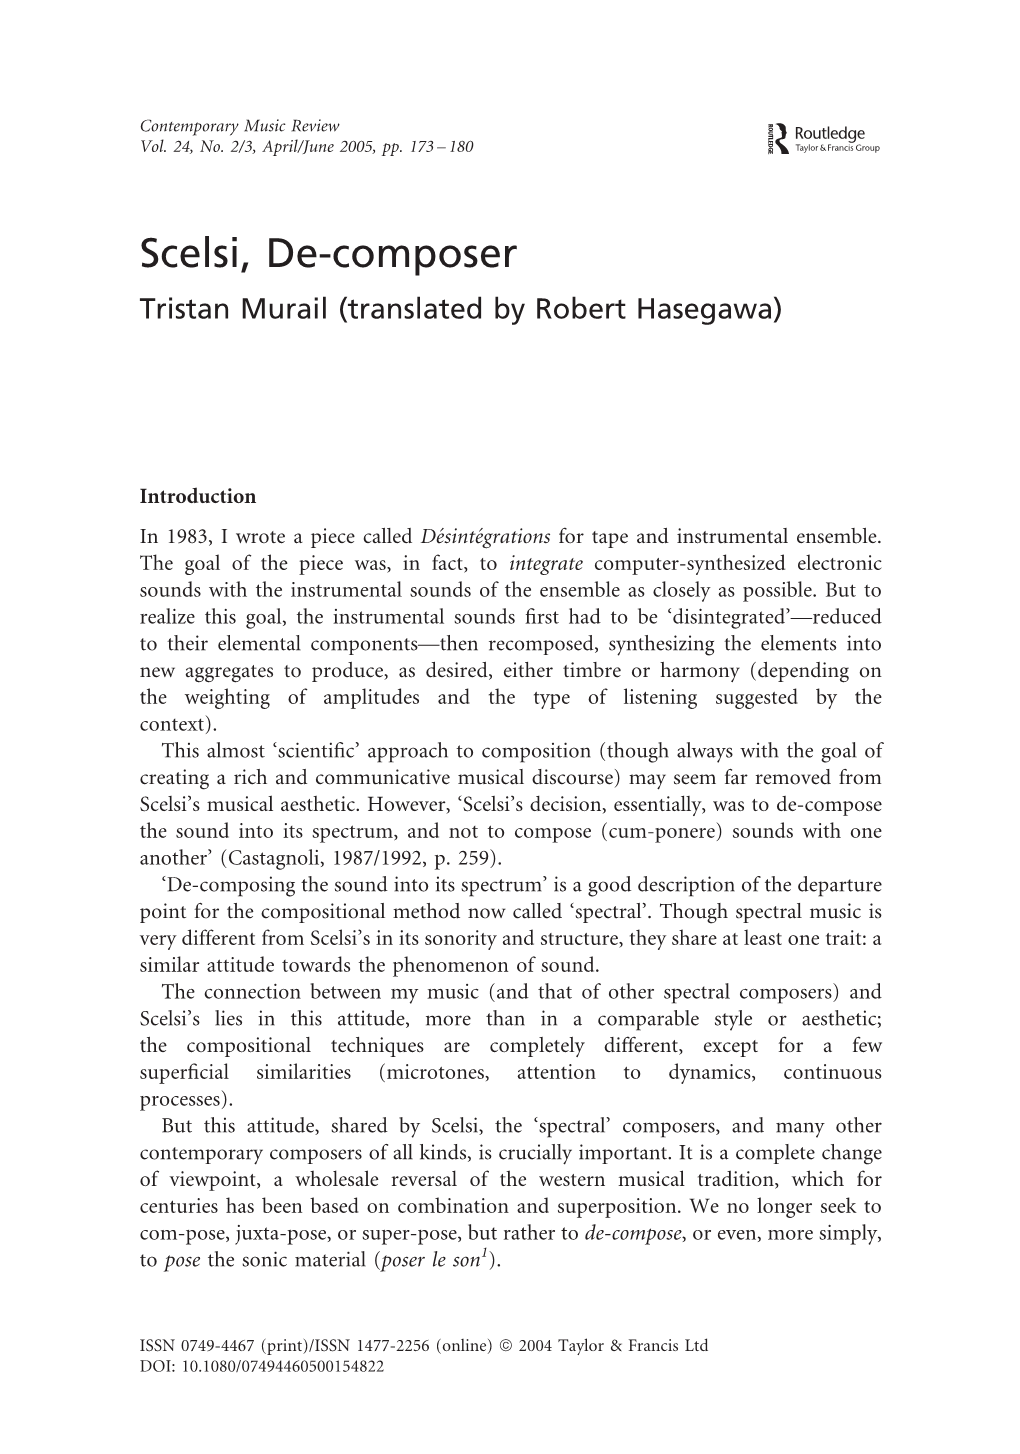 Scelsi, De-Composer Tristan Murail (Translated by Robert Hasegawa)